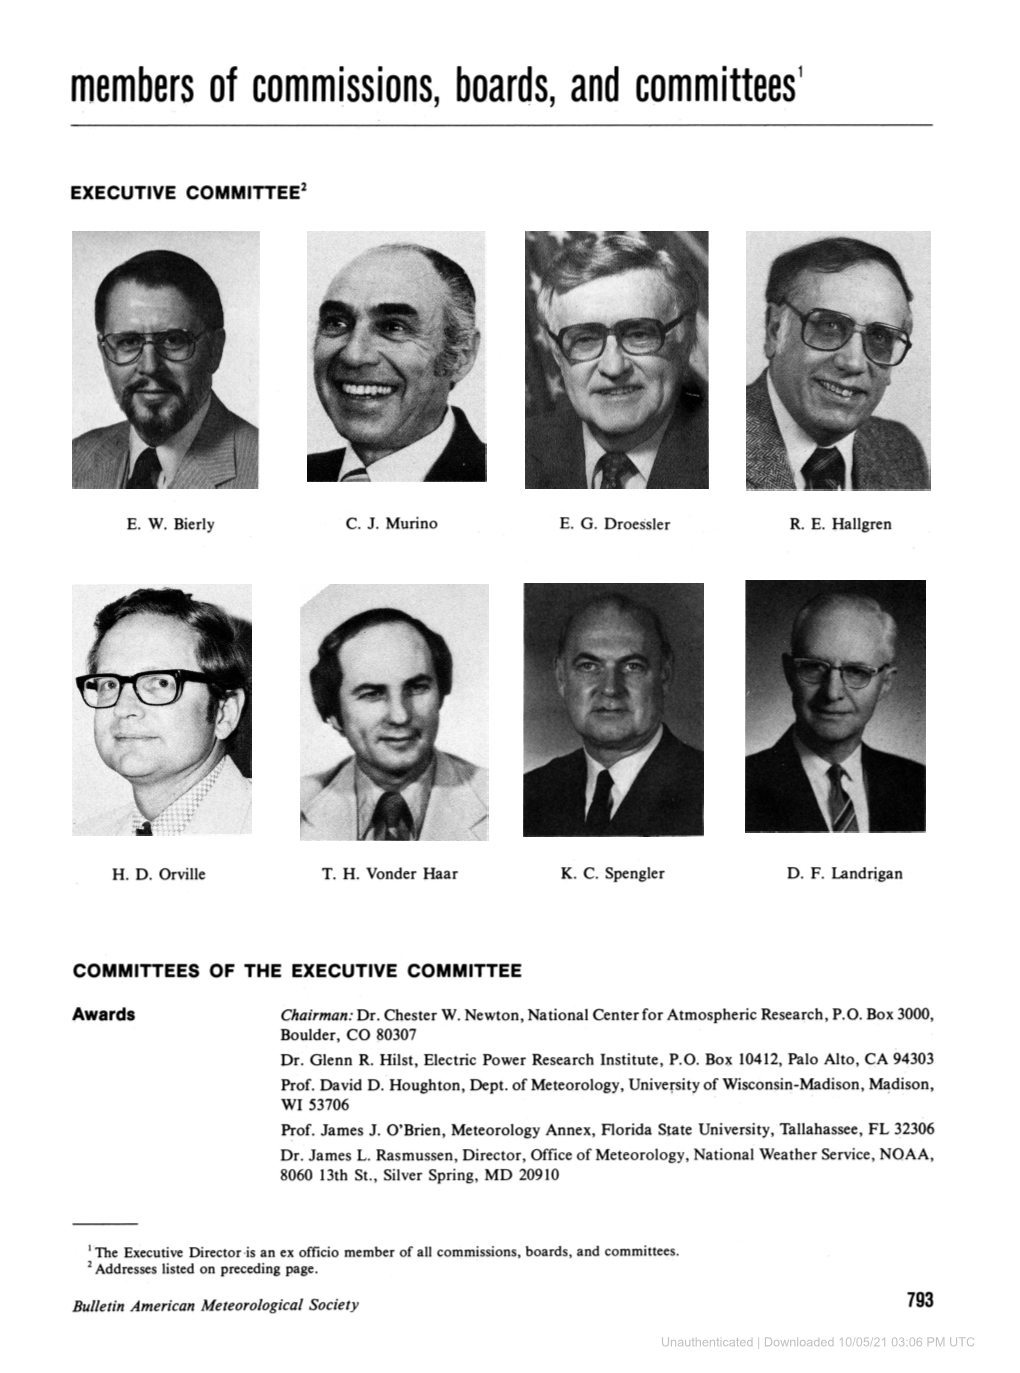 Members of Commissions, Boards, and Committees'